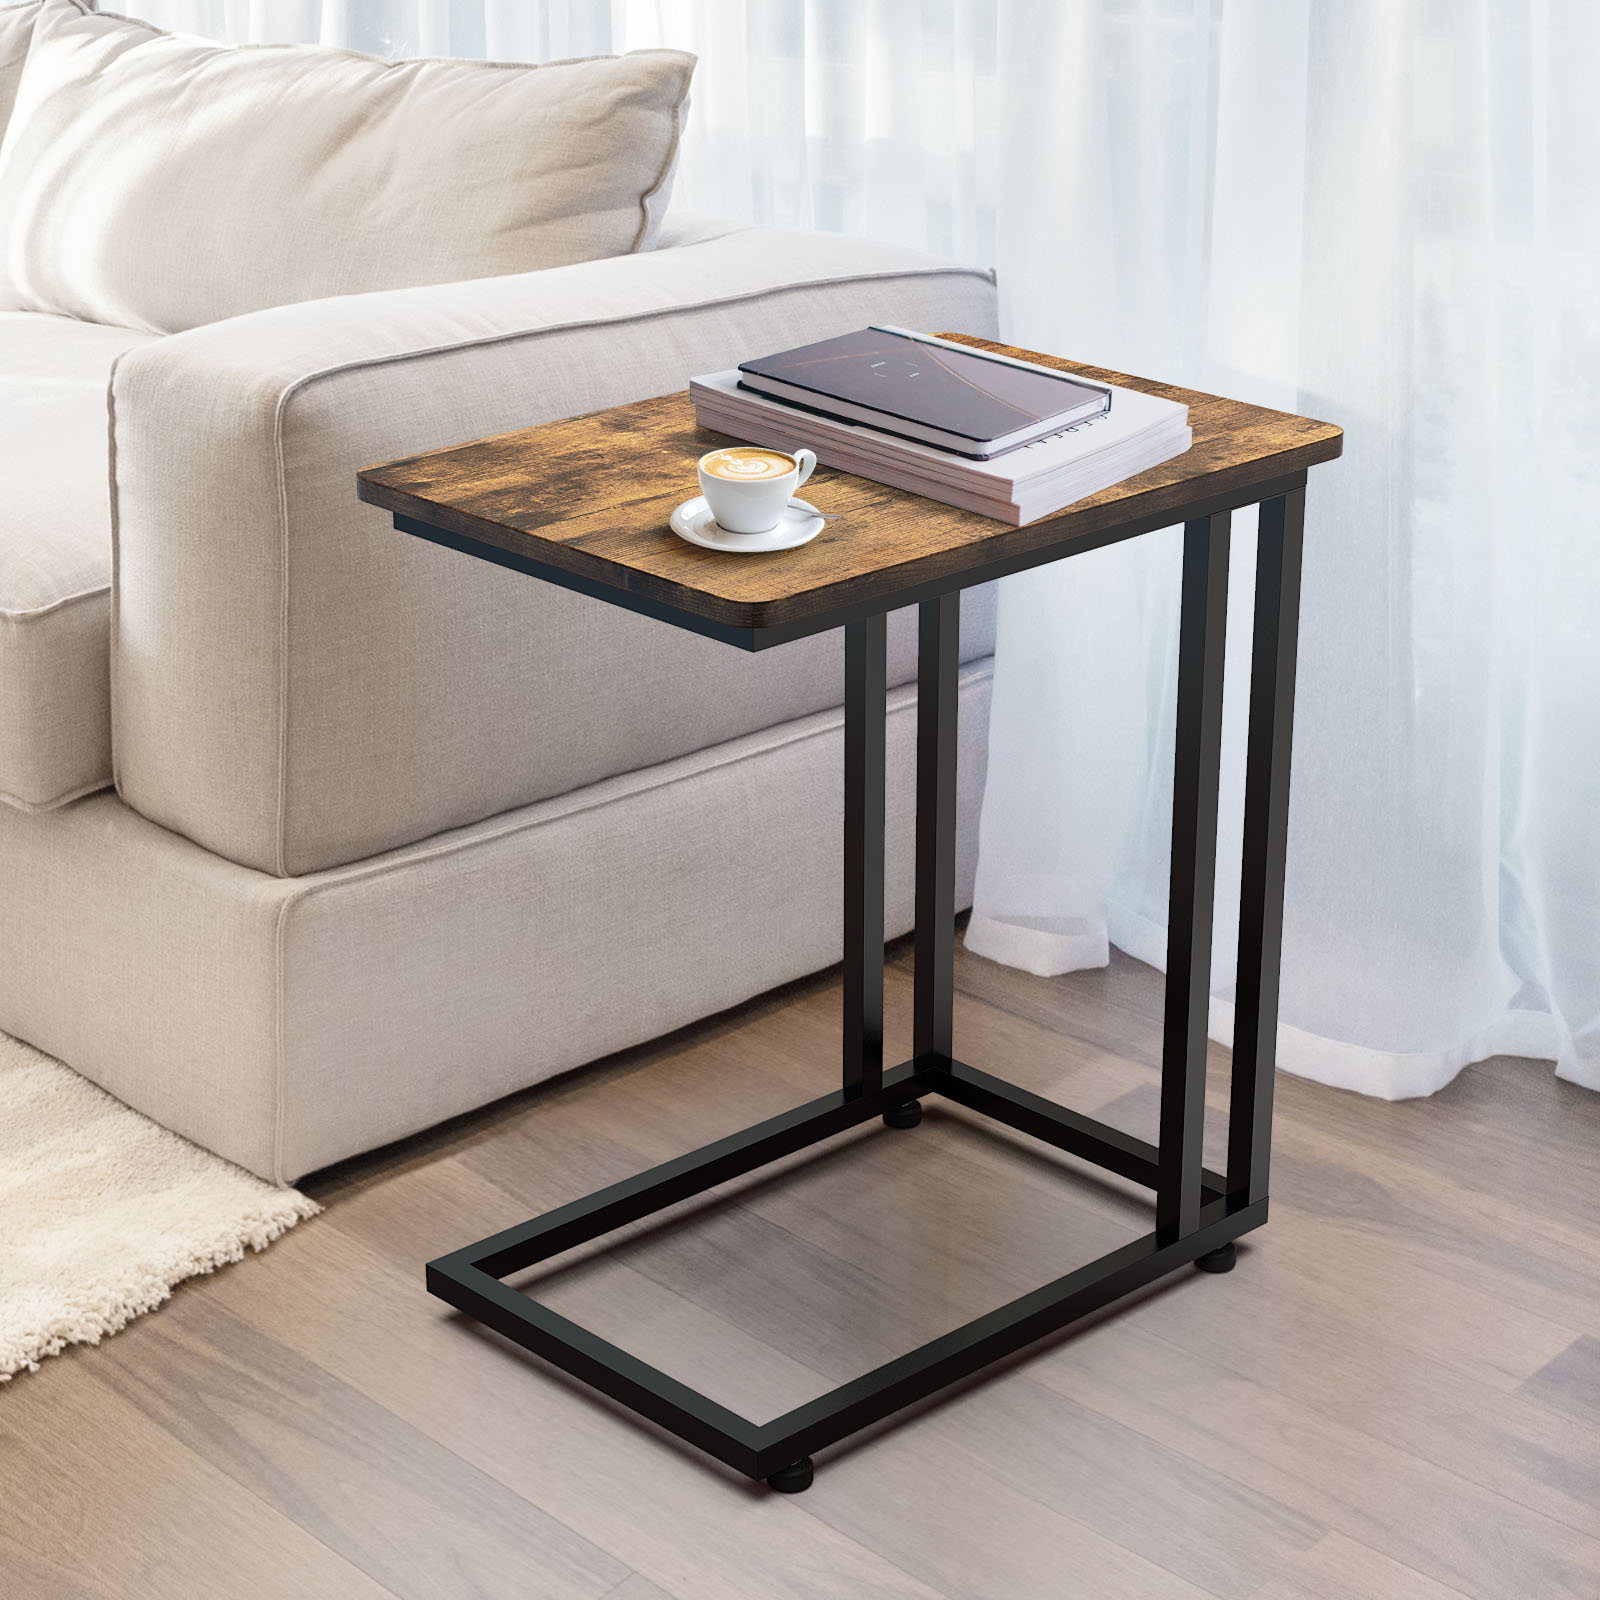 C Shaped Side Table End Table with Metal Frame Under The Sofa Overbed Table for Sofa Couch Living Room Bedroom  Small Spaces-Boyel Living